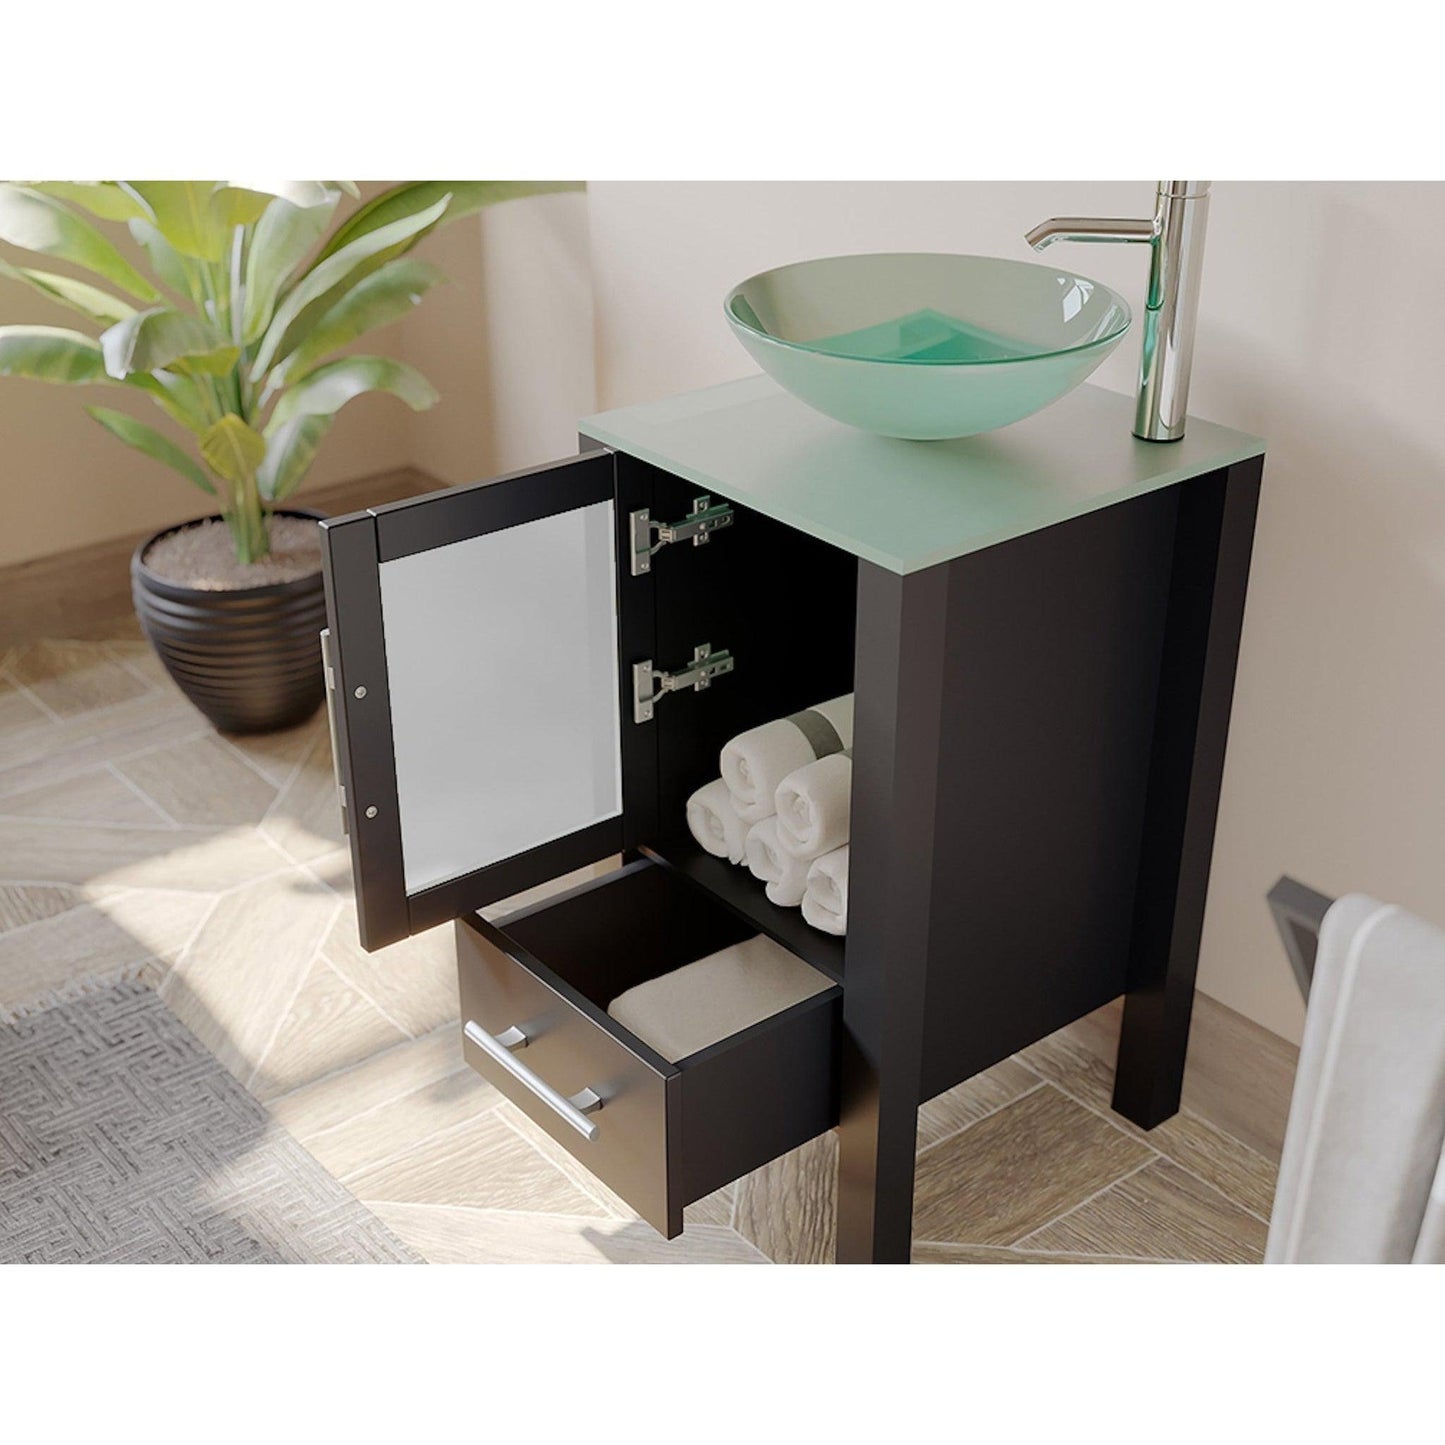 Cambridge Plumbing 18" Black Espresso Wood Single Vanity Set With Tempered Glass Countertop And Circular Vessel Sink With Brushed Nickel Plumbing Finish